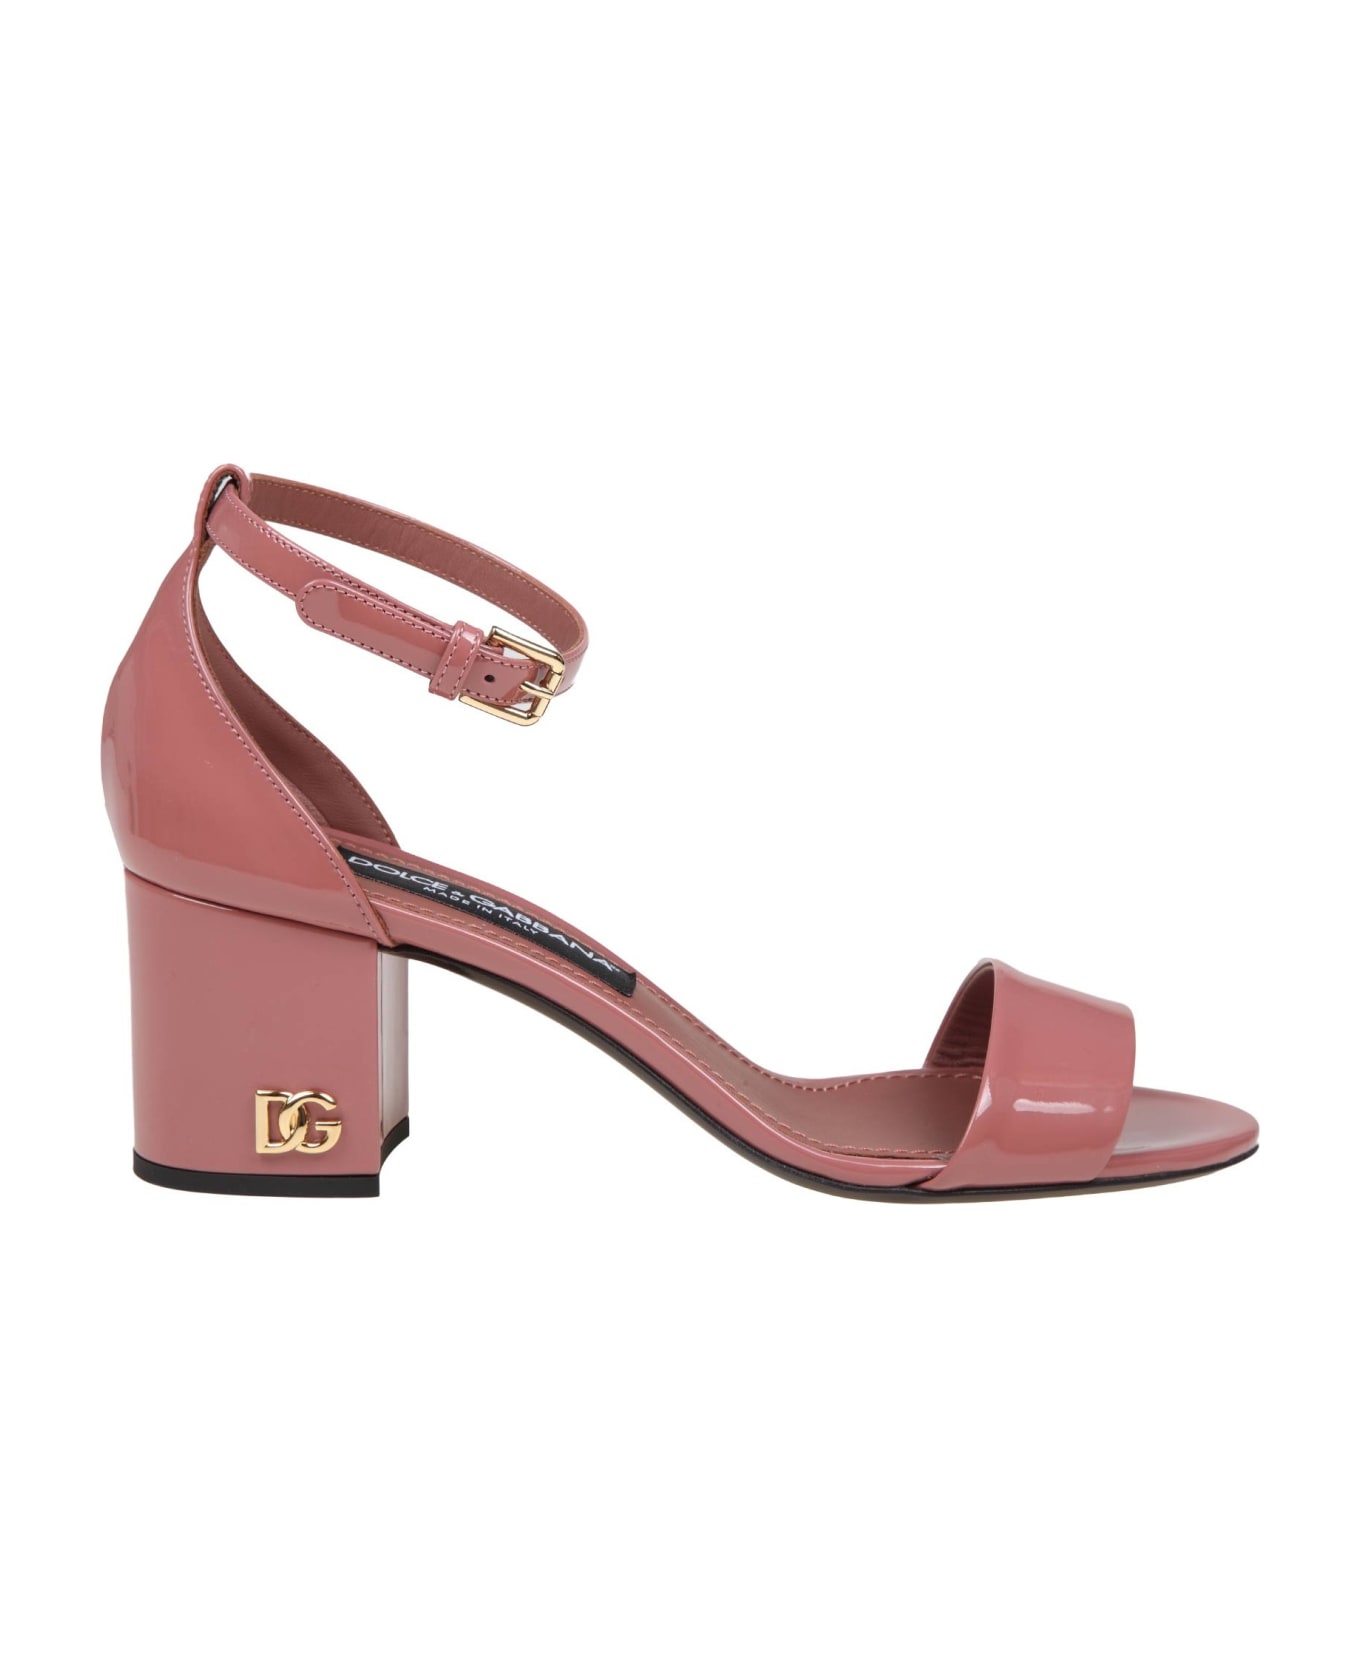 Dolce & Gabbana Pink Paint Leather Sandals - PINK サンダル